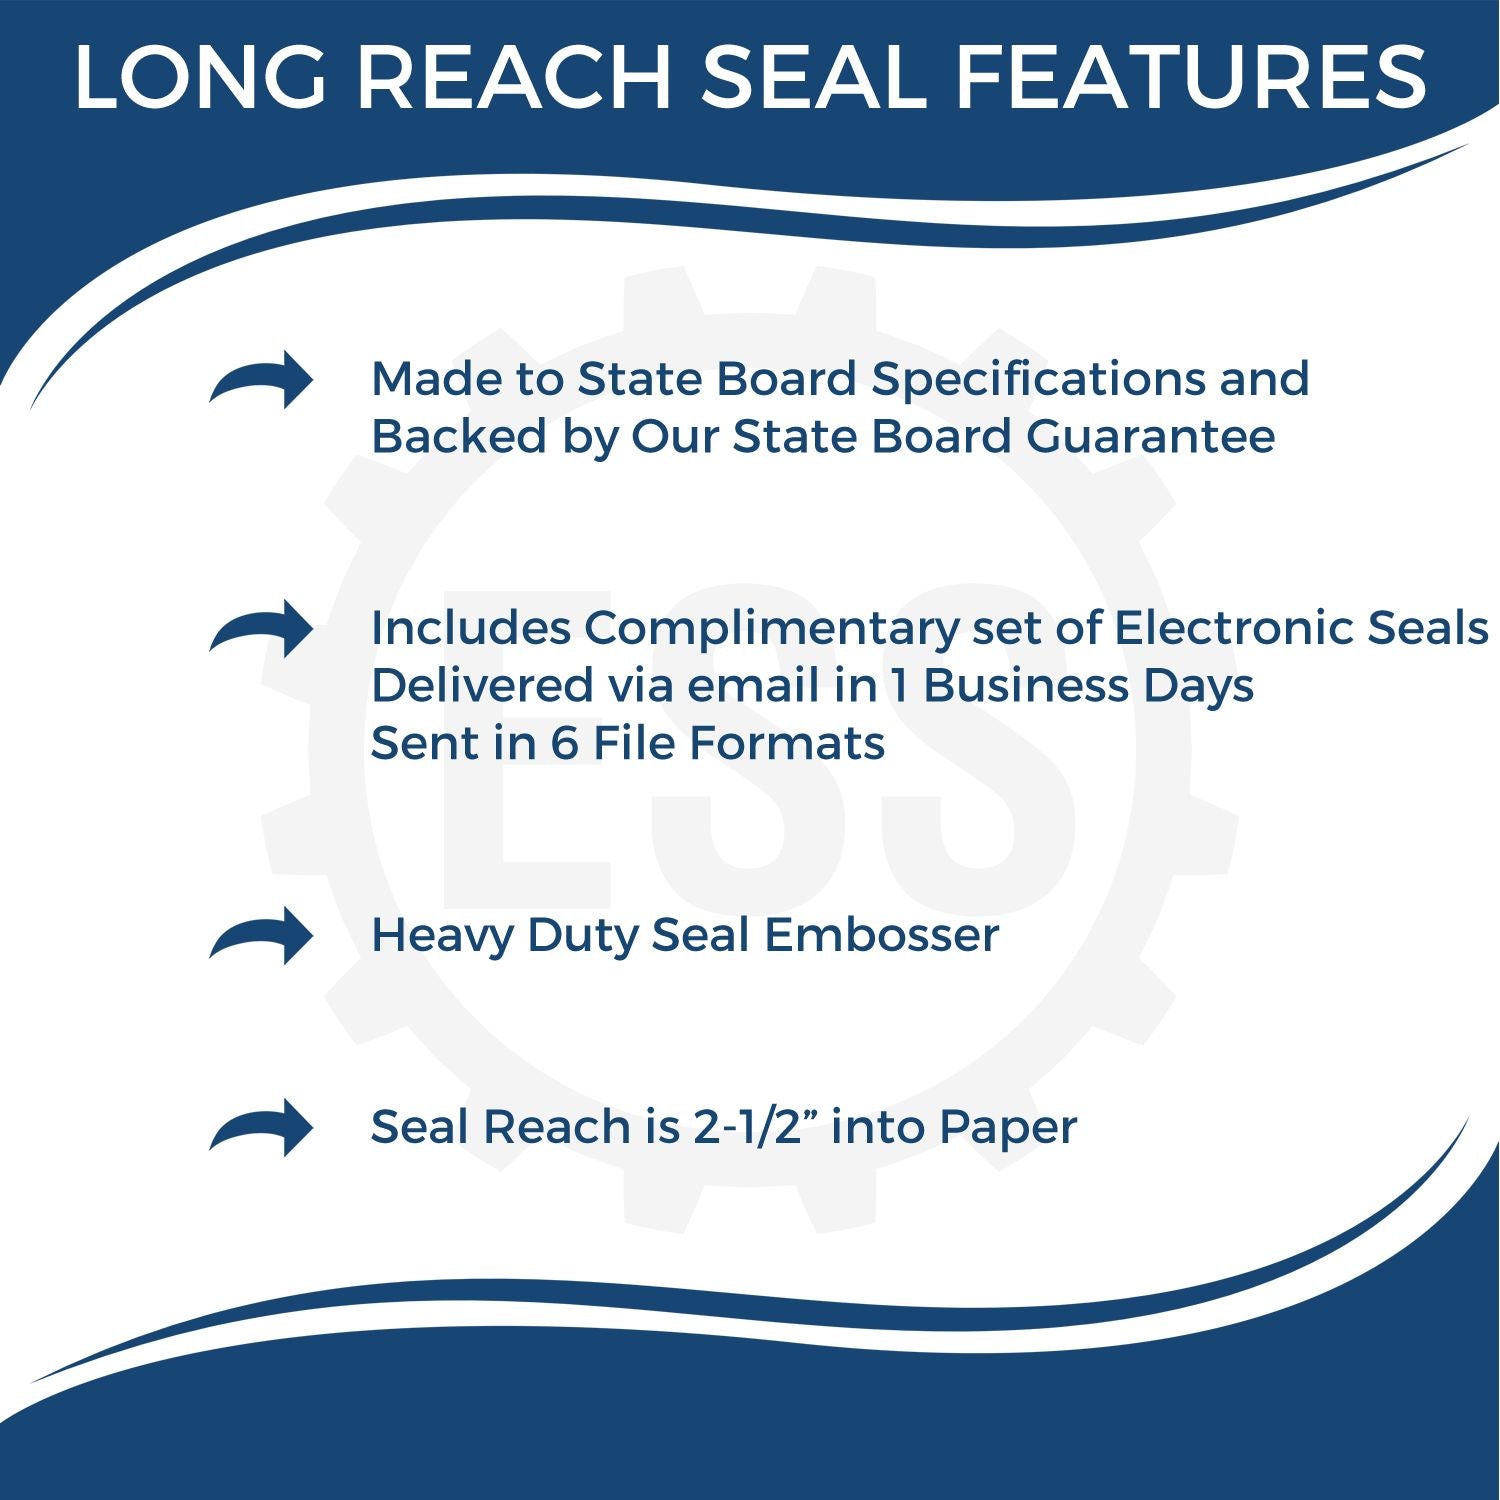 The main image for the Long Reach West Virginia PE Seal depicting a sample of the imprint and electronic files